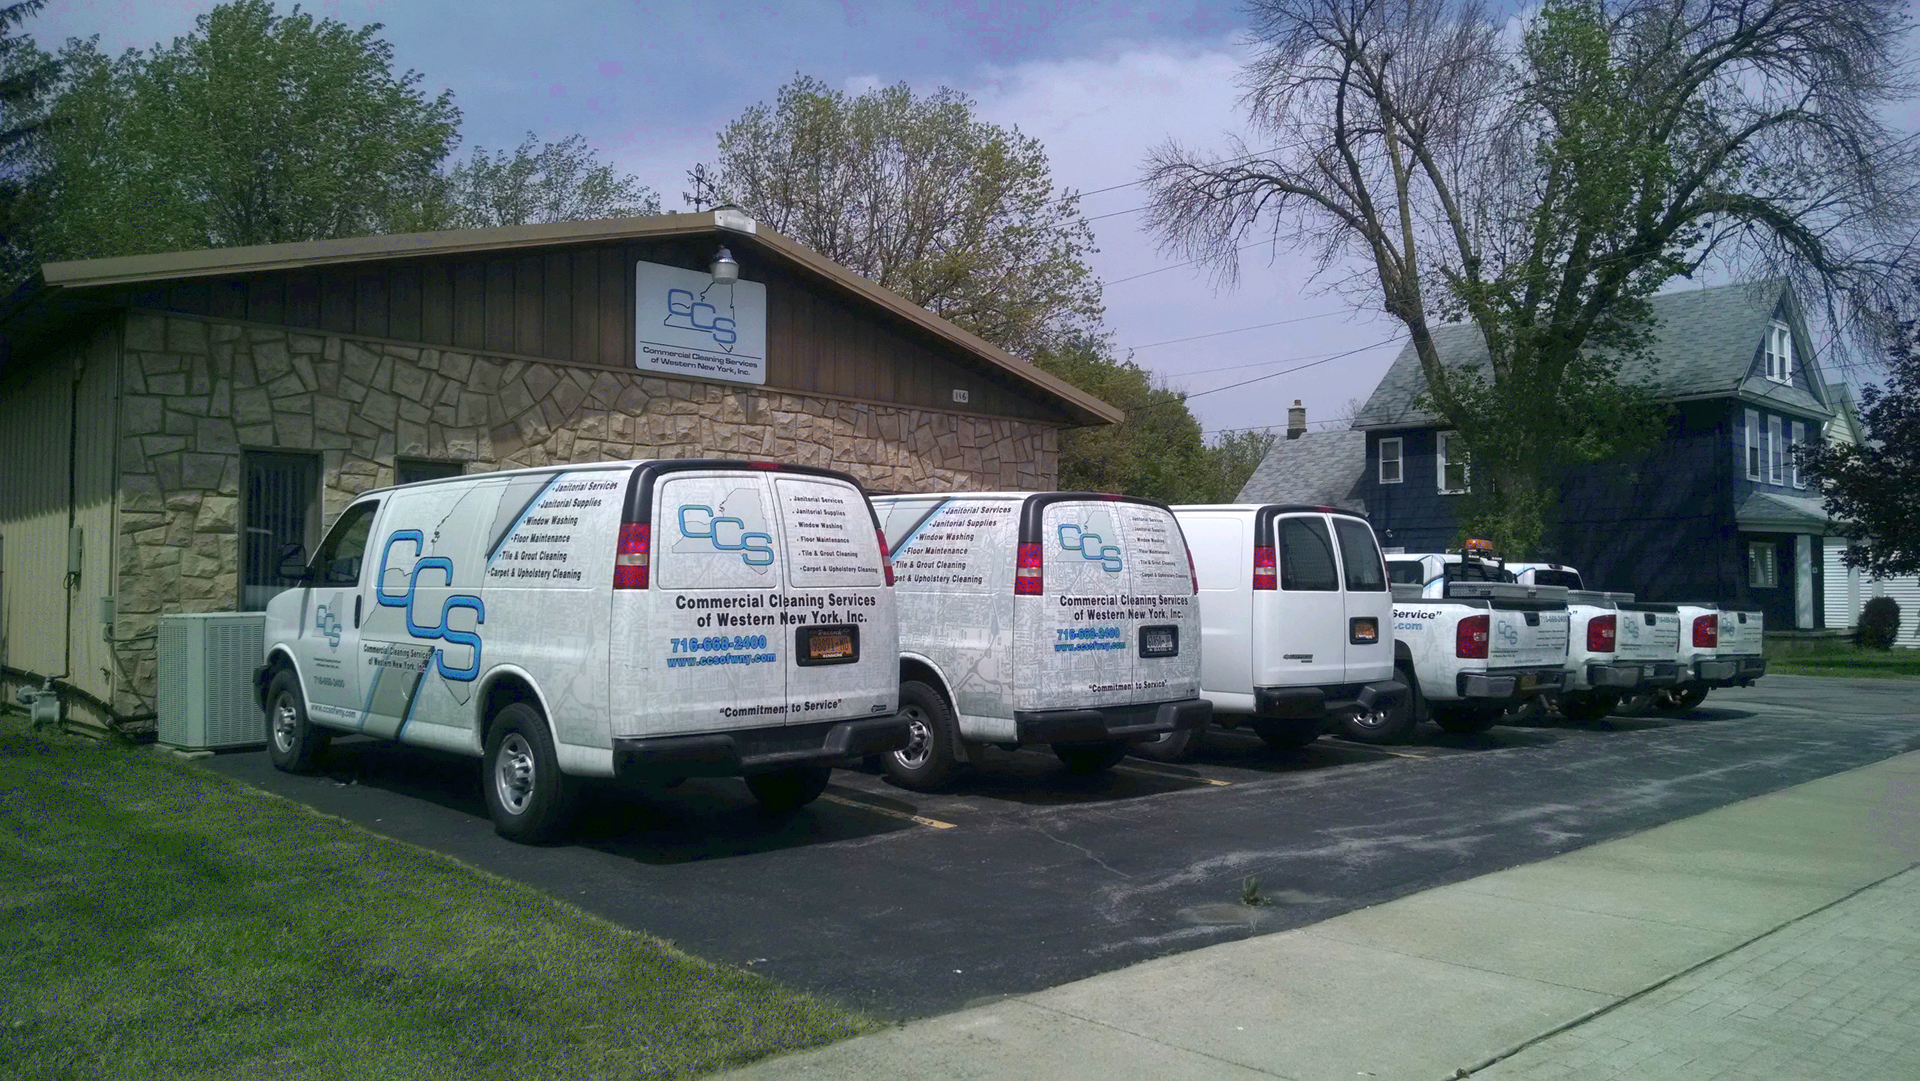 A row of white vans parked in front of a building